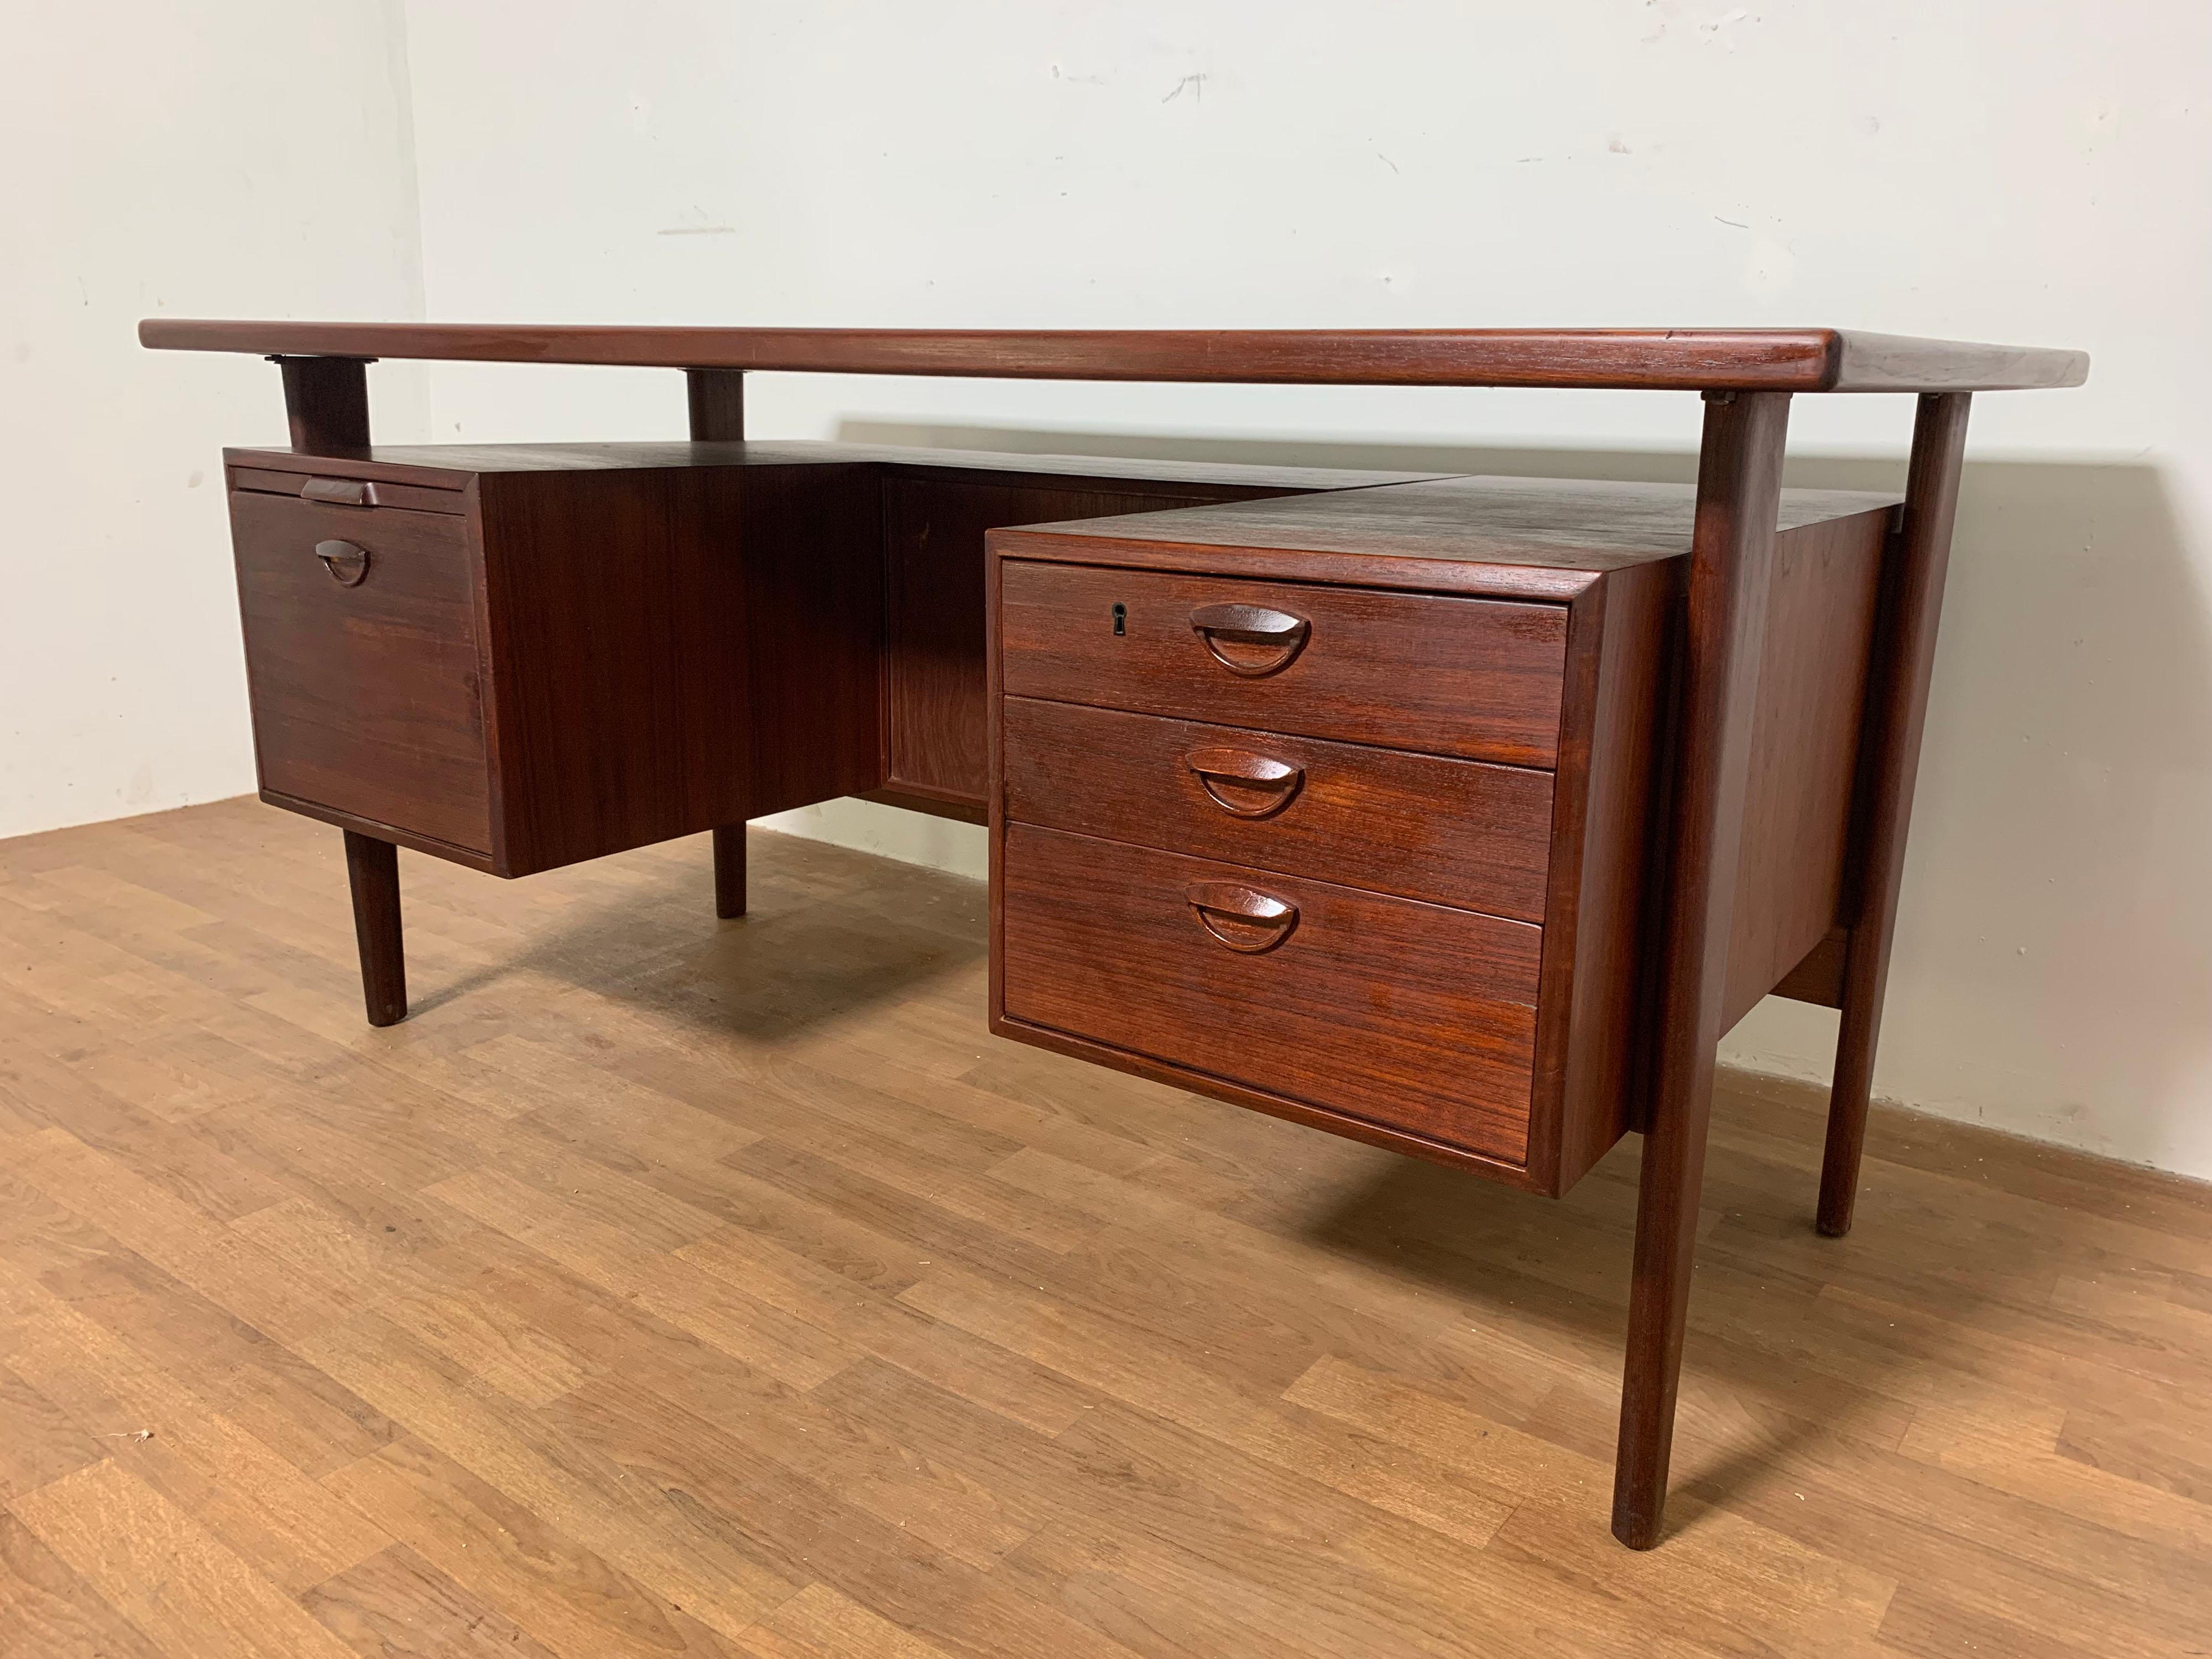 Teak desk by Kai Kristiansen, designed in 1958 for Feldballes Mobelfabrik, Denmark. Three drawers on the right and file cabinet drawer on the left, all featuring Kristiansen's signature carved handles. Above the file cabinet drawer is a pull out